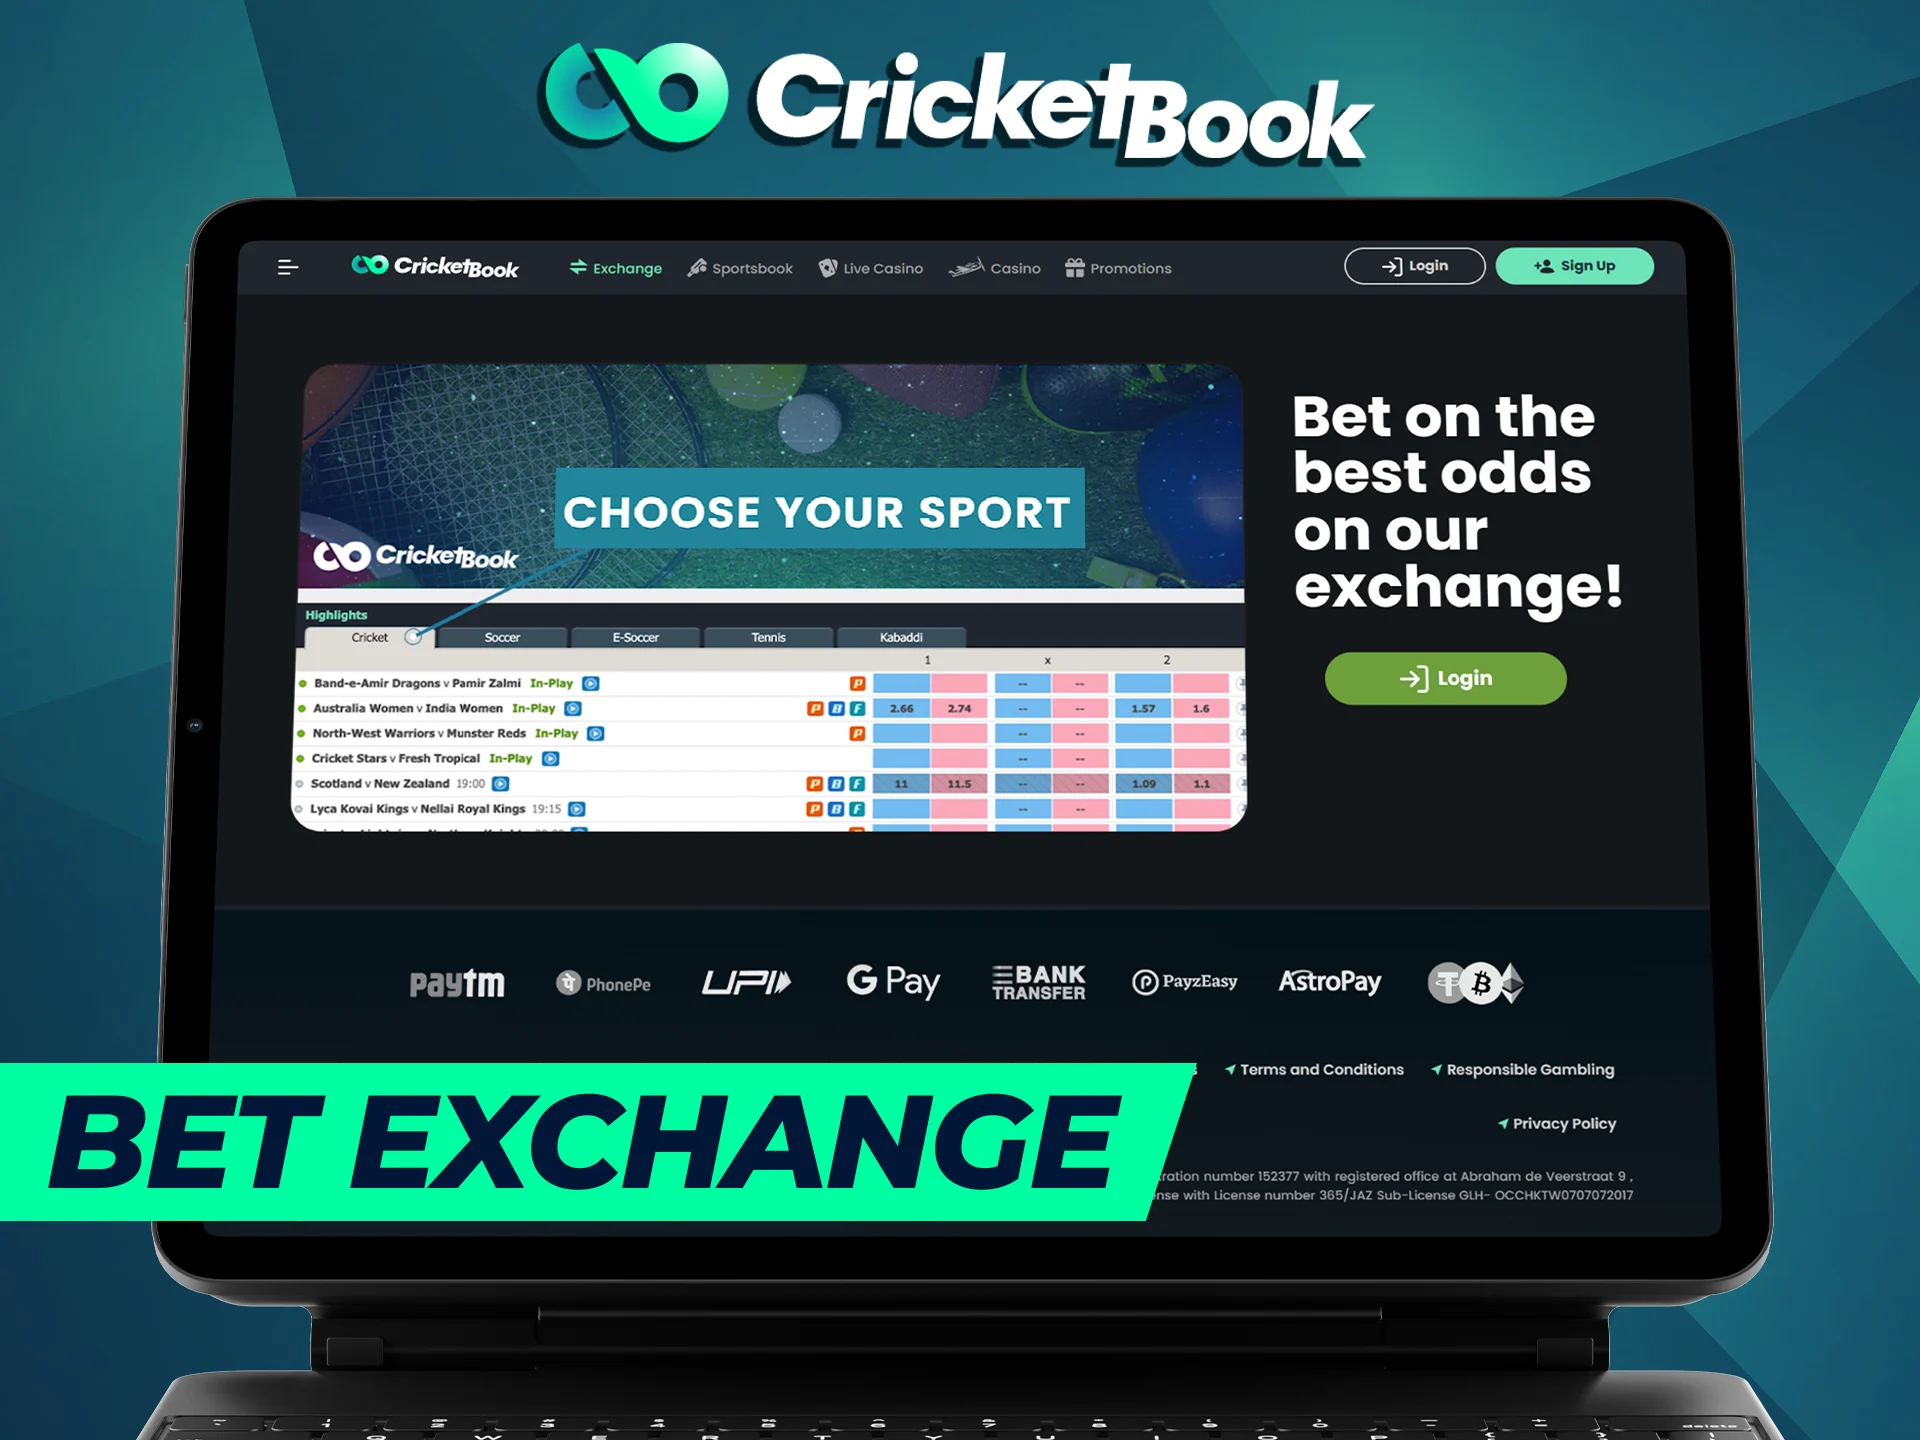 The CricketBook betting exchange offers a diverse selection of sports betting.